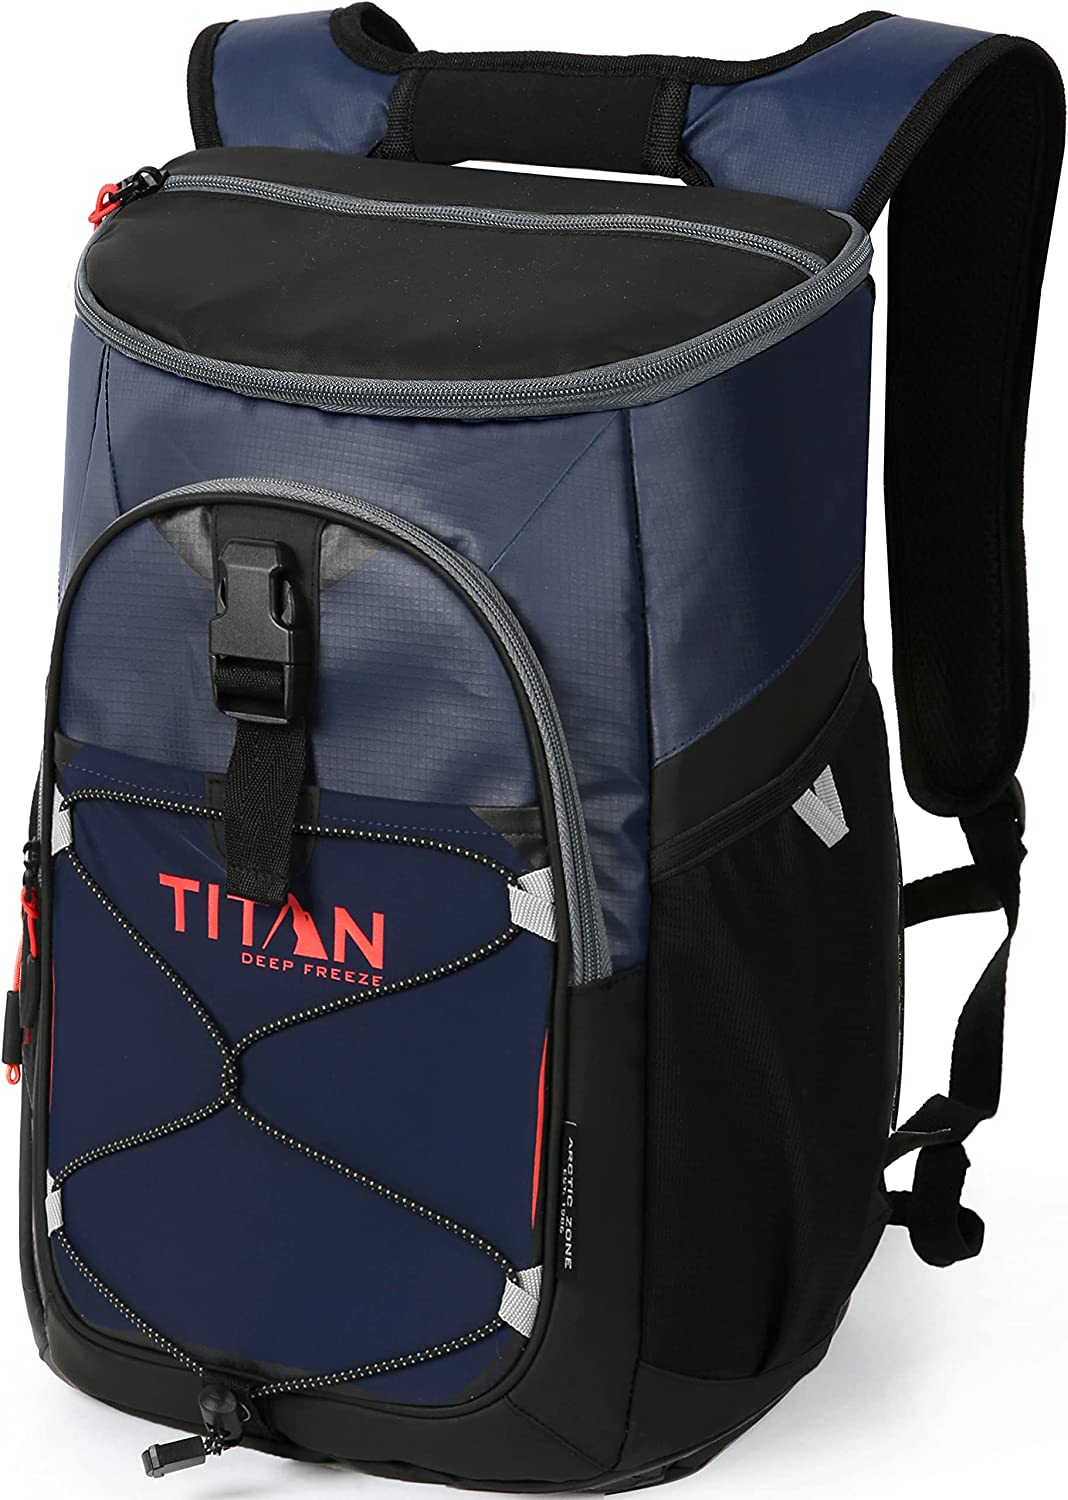 https://www.switchbacktravel.com/sites/default/files/image_fields/Best%20Of%20Gear%20Articles/Camping/Backpack%20coolers/Arctic%20Zone%20Titan%20Deep%20Freeze%2024%20Can%20backpack%20cooler.jpg